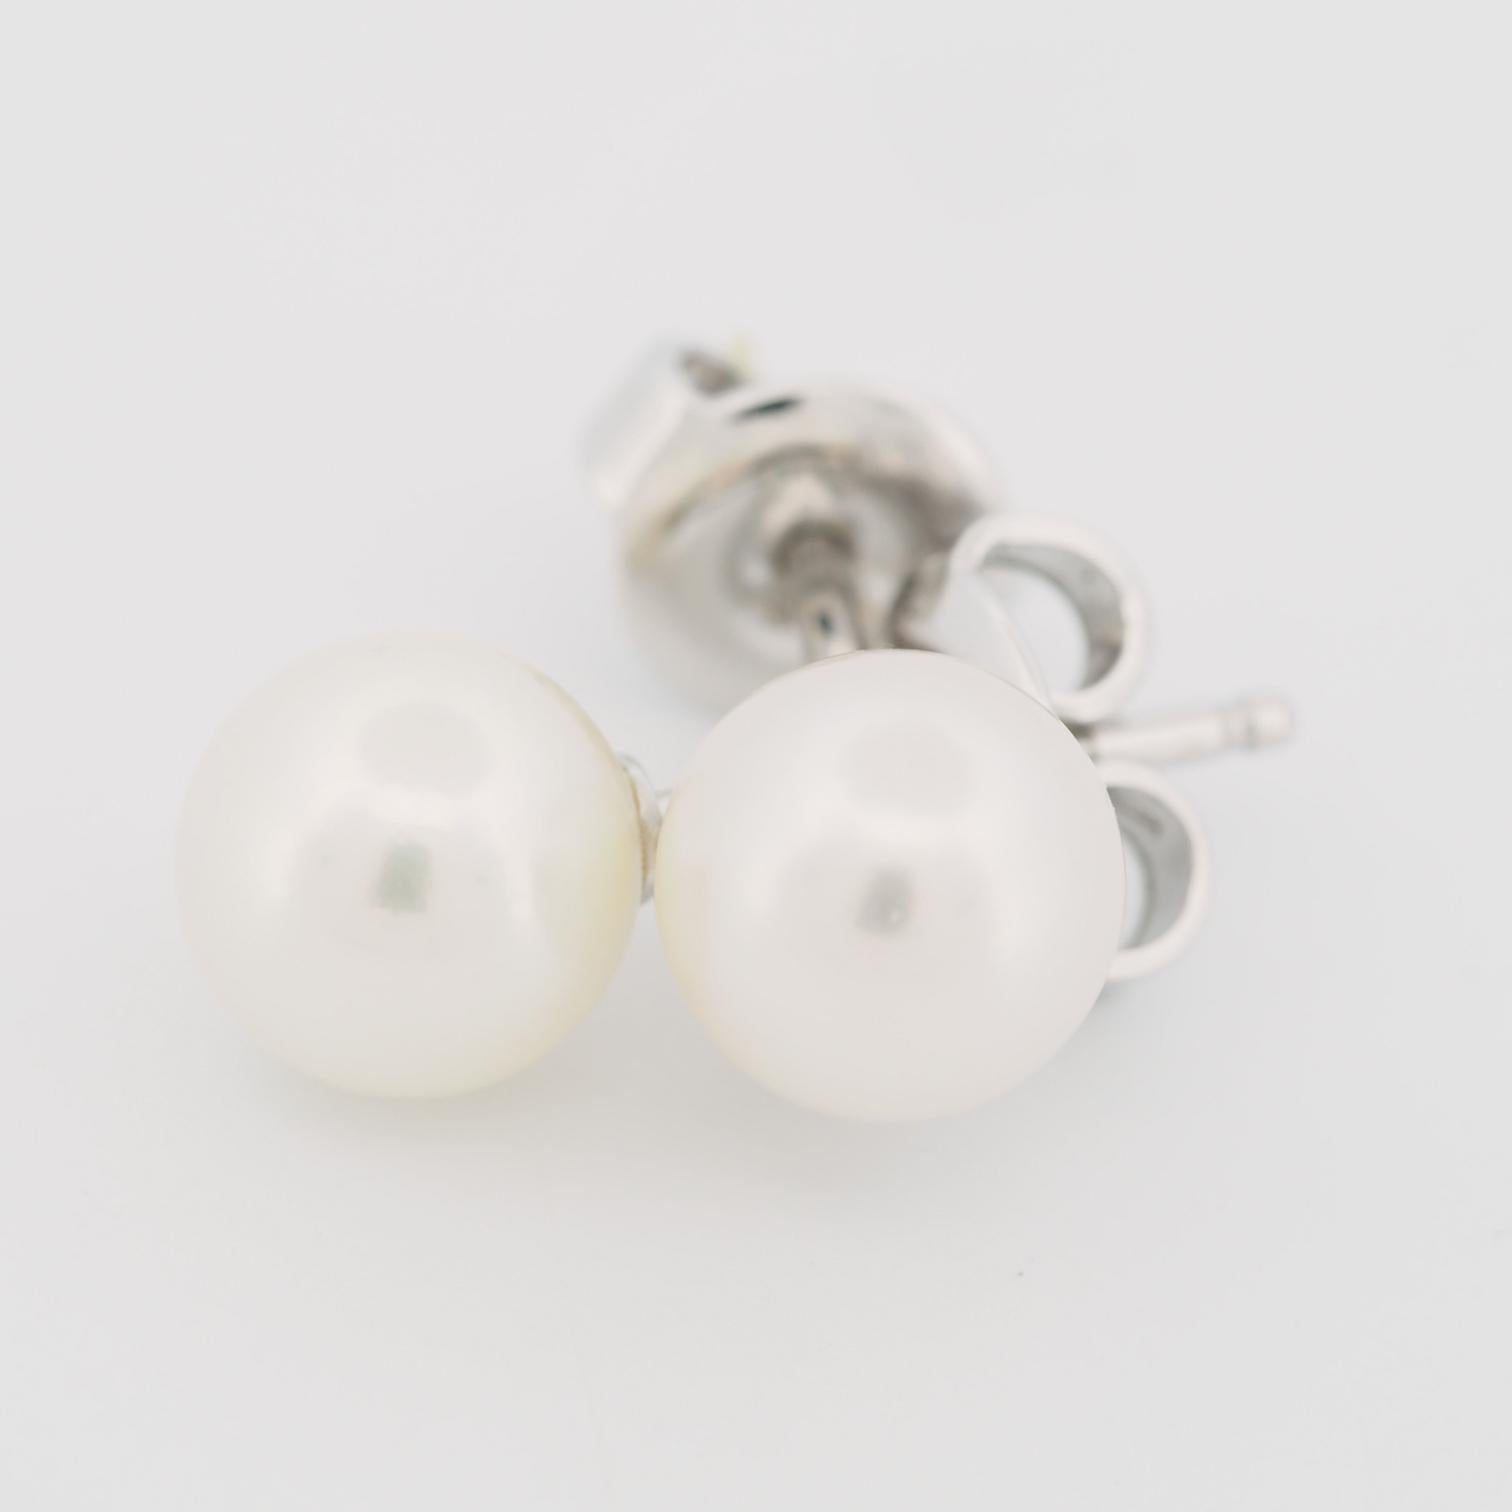 Mikimoto 6.5 mm Akoya Pearl Post Earrings 18k White Gold In Good Condition For Sale In Kobe, Hyogo